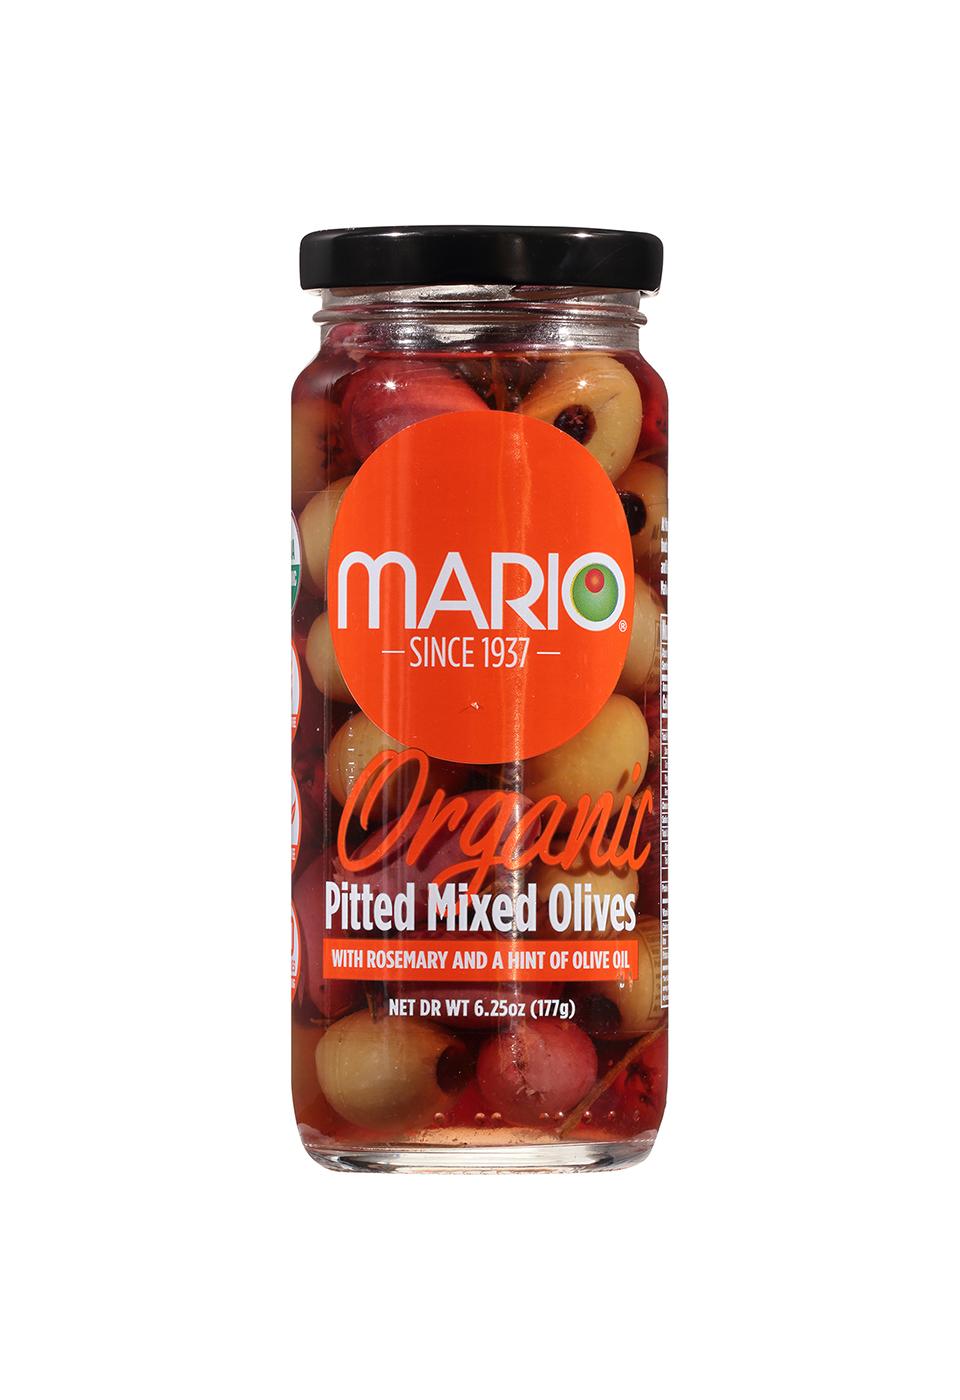 Mario Organic Pitted Mixed Olives with Rosemary & Olive Oil; image 1 of 2